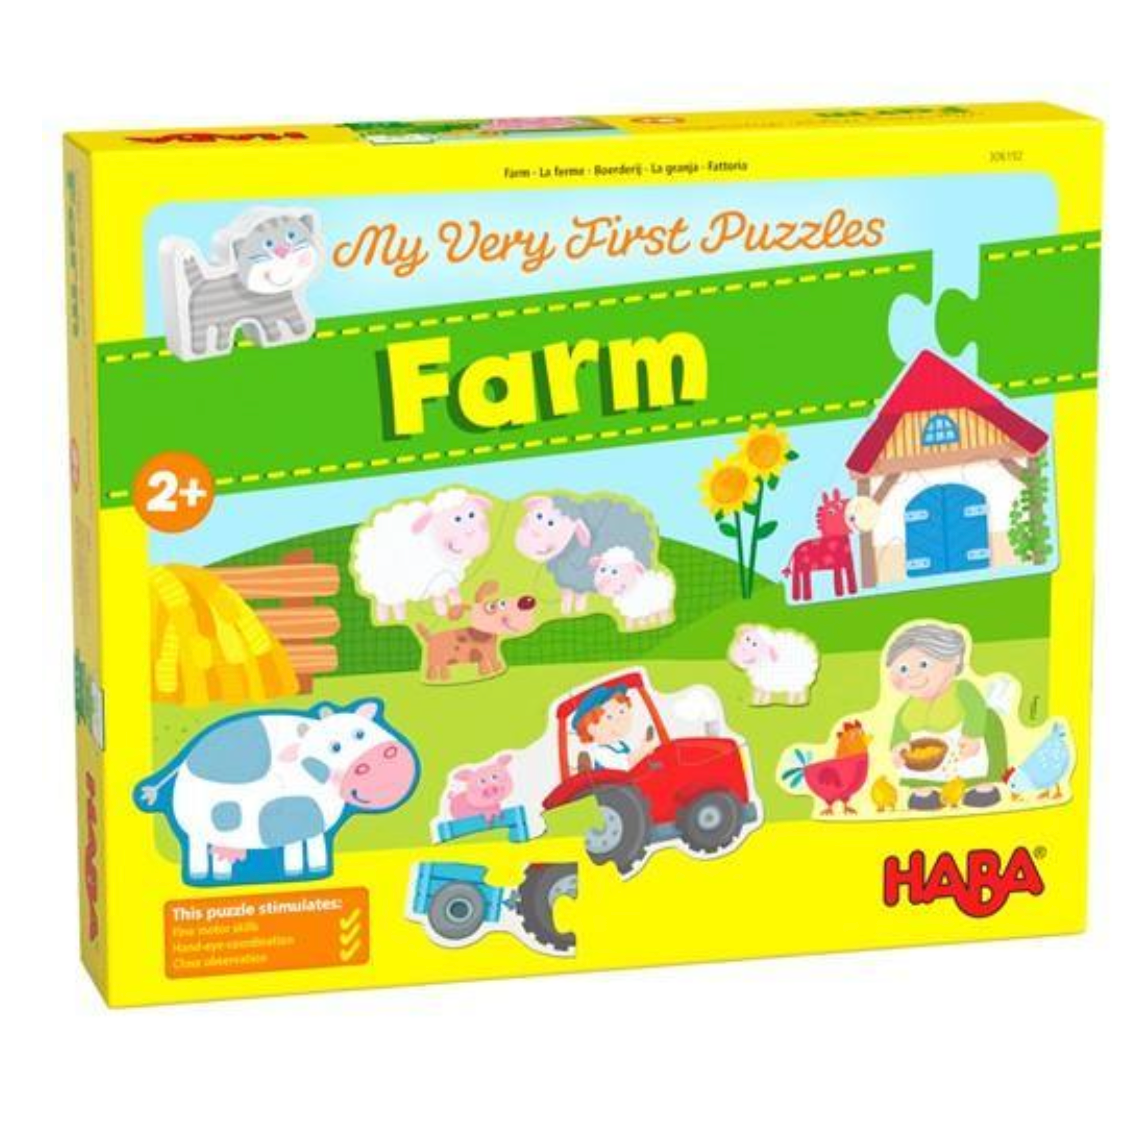 My Very First Puzzles - Farm By Haba